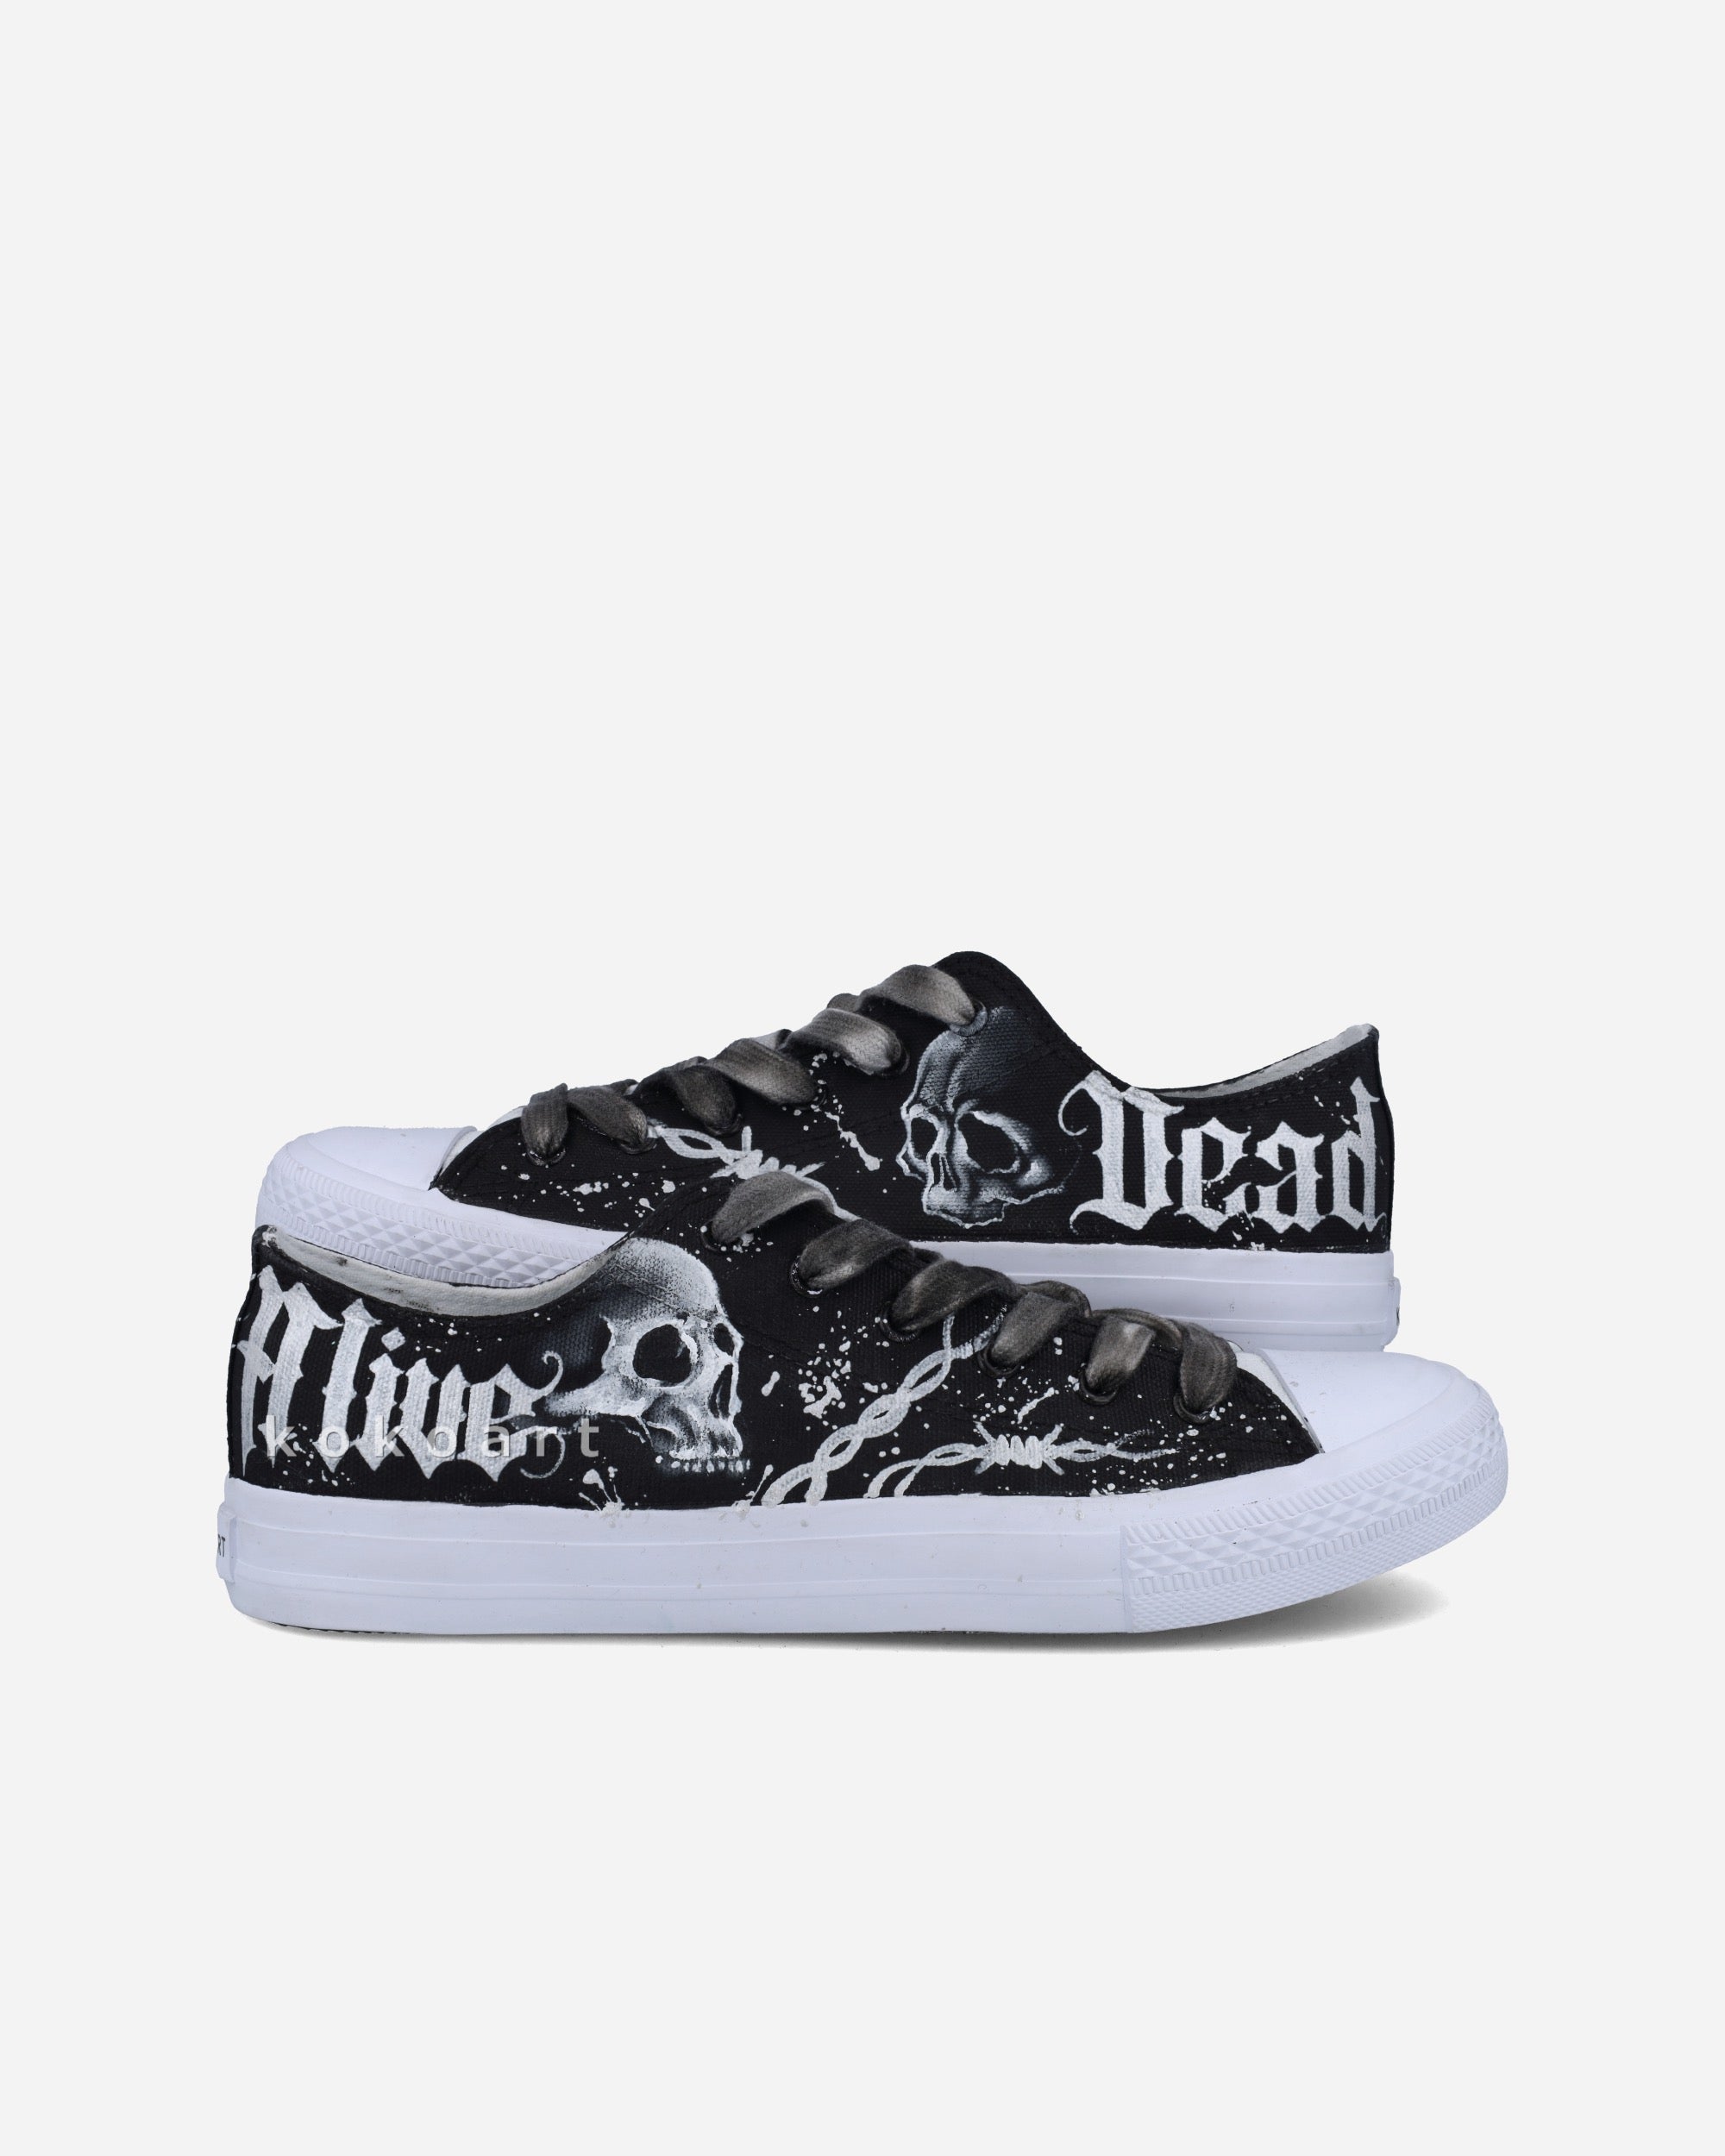 Dead Alive Hand Painted Shoes